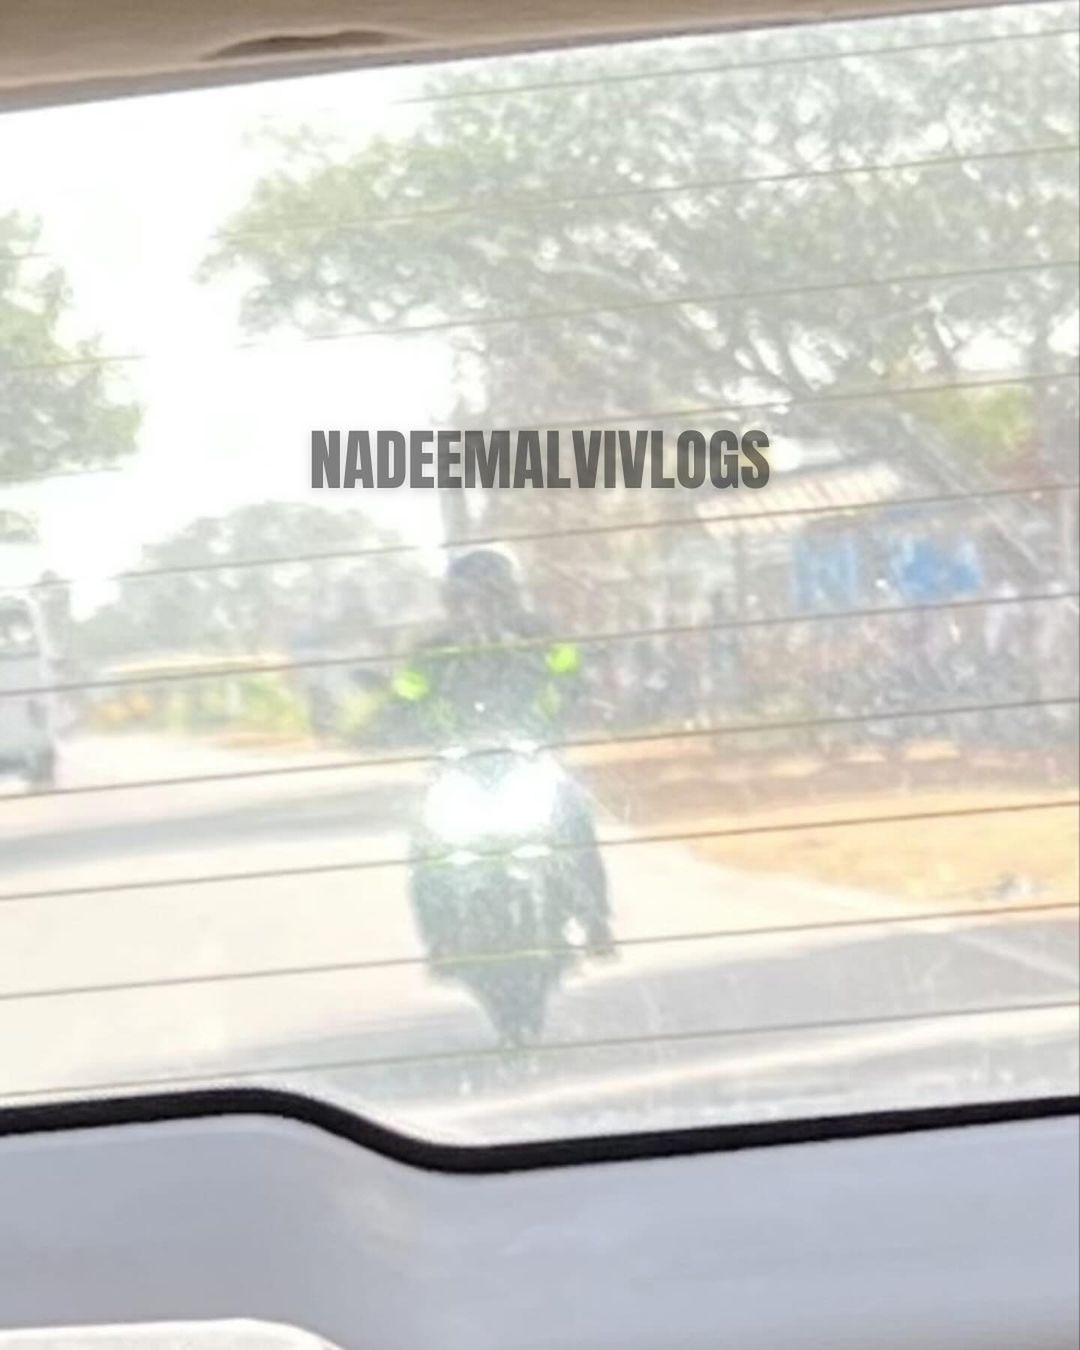 TVS Apache RTR 310 (Naked RR 310) Spotted On Road For The First Time - closeup